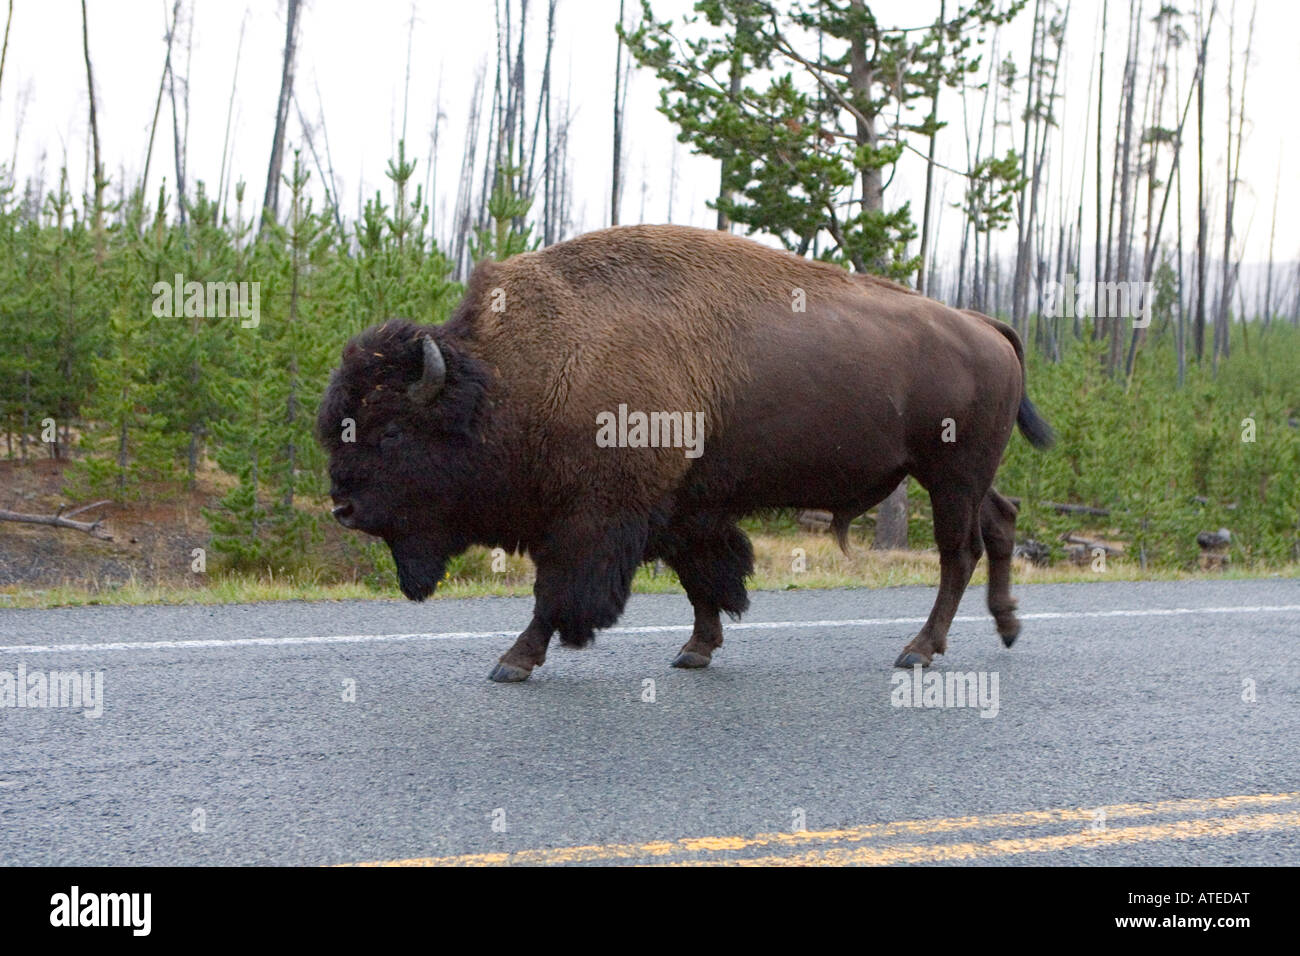 A bison takes a stroll in Yellowstone National Park, Wyoming Stock Photo